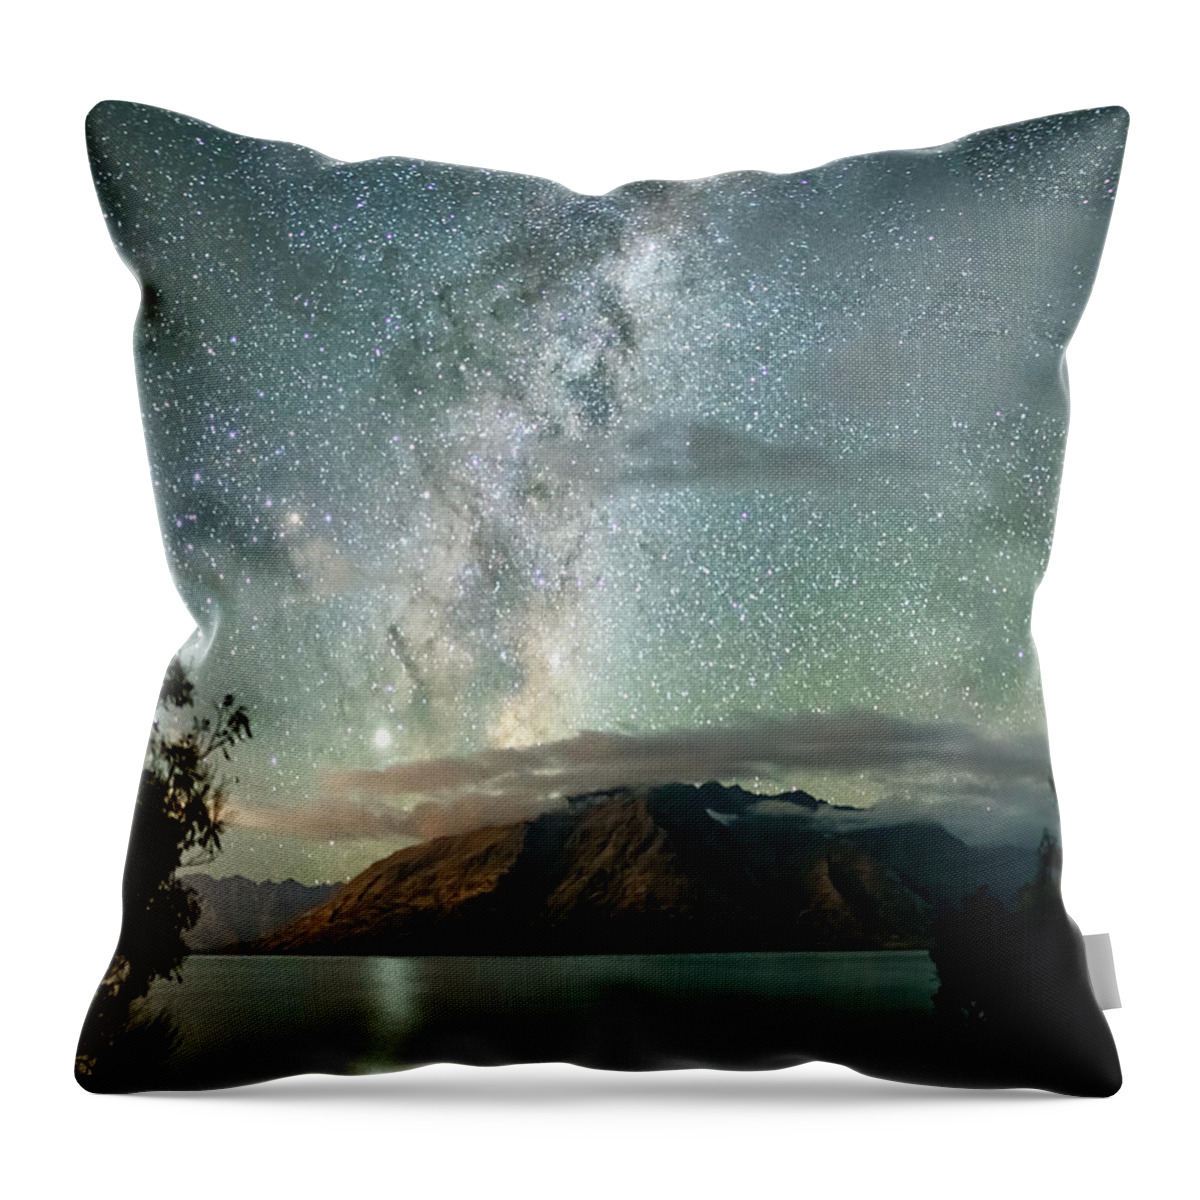 Nikon Z 7 Throw Pillow featuring the photograph Lake Te Anau Southern Hemisphere Night Sky NZ by Lena Owens - OLena Art Vibrant Palette Knife and Graphic Design